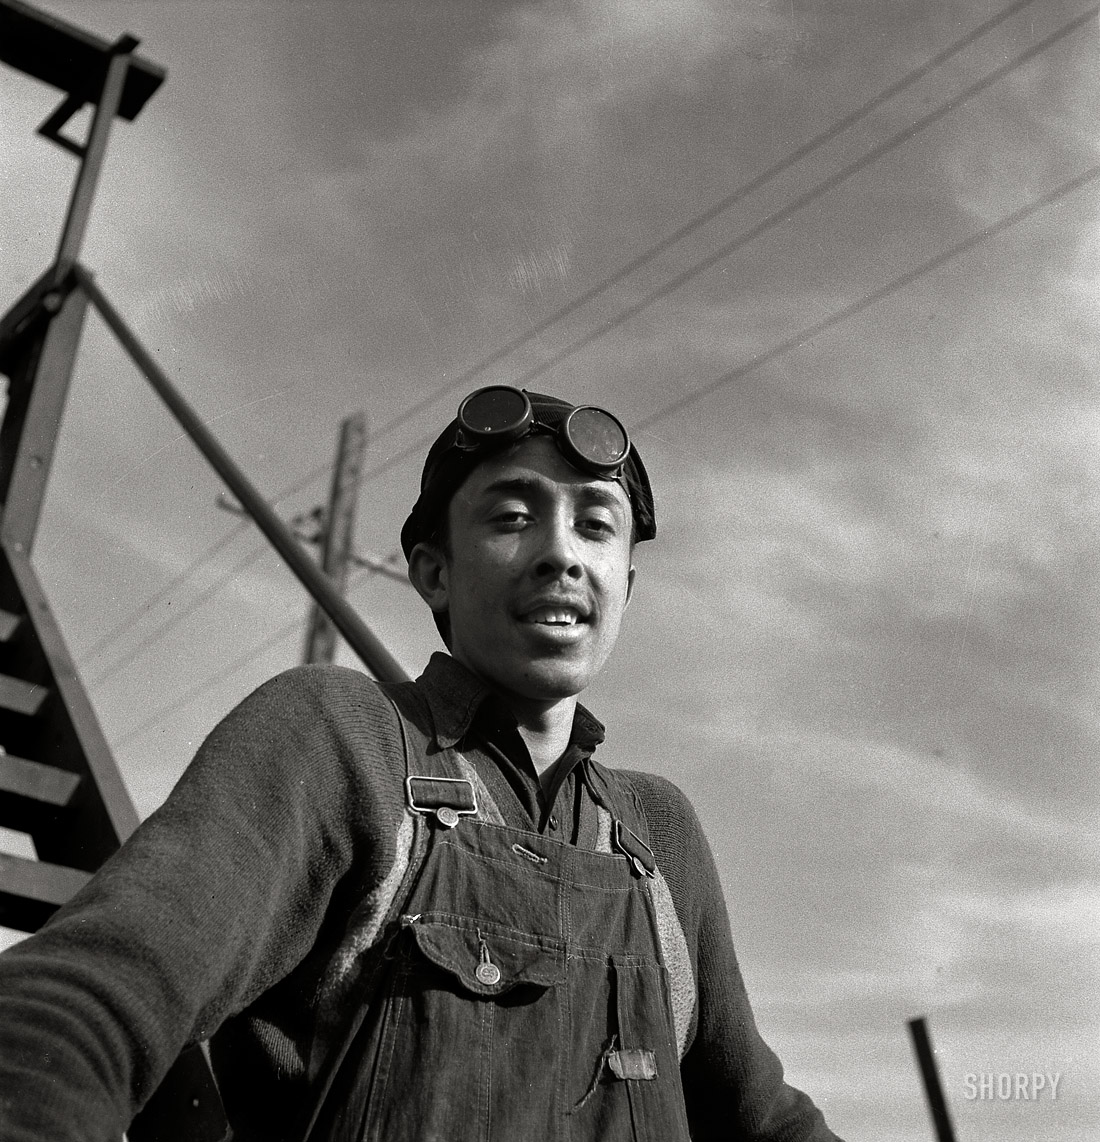 March 1943. "Topeka, Kansas. Eladio Tostado, steel car repairer's helper and rivet heater, at car shops of the Atchison, Topeka and Santa Fe." Medium-format negative by Jack Delano for the Office of War Information. View full size.